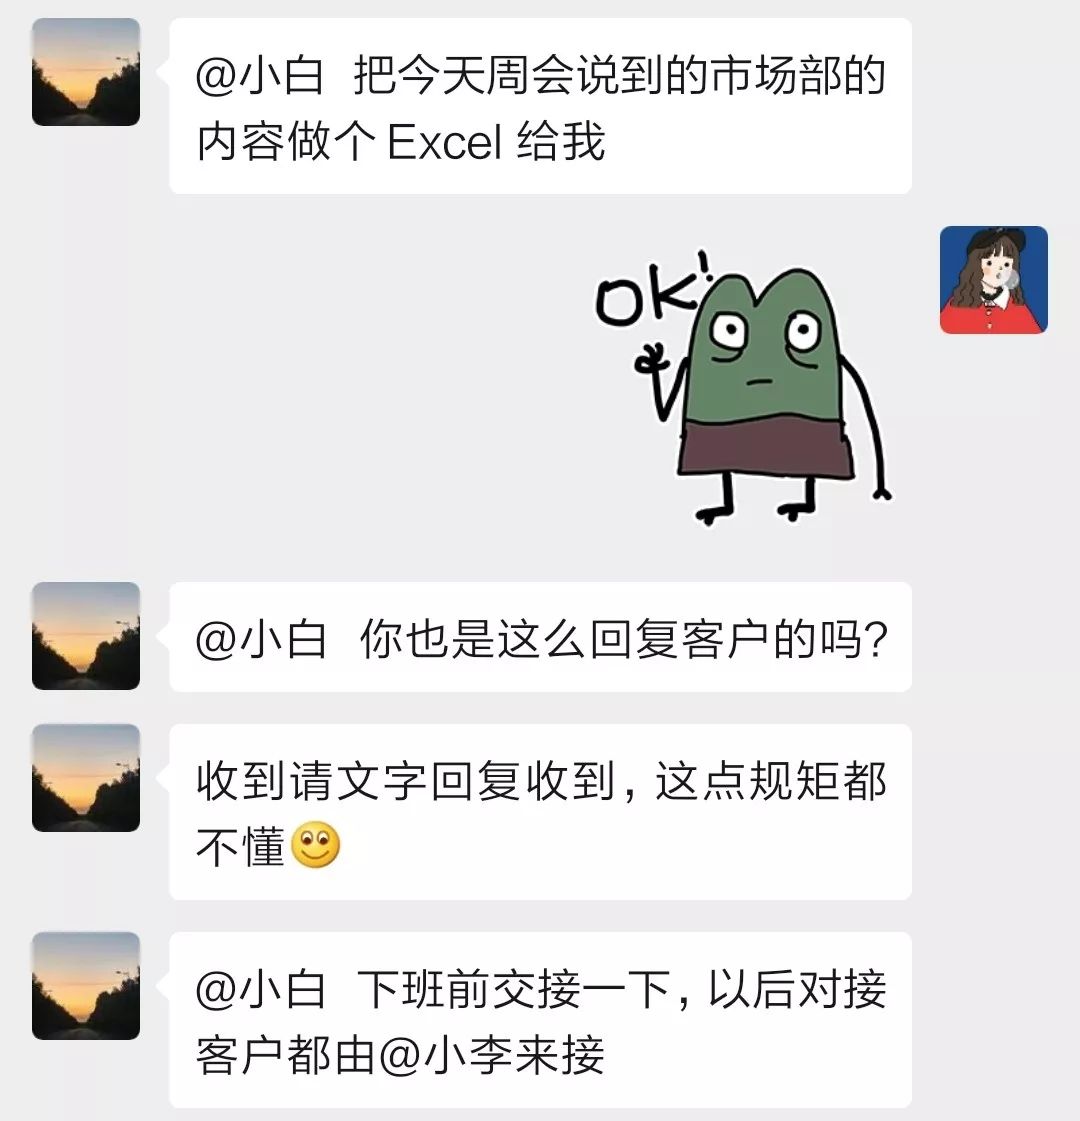 What is your boss thinking about in the 24 minutes of not returning to WeChat?